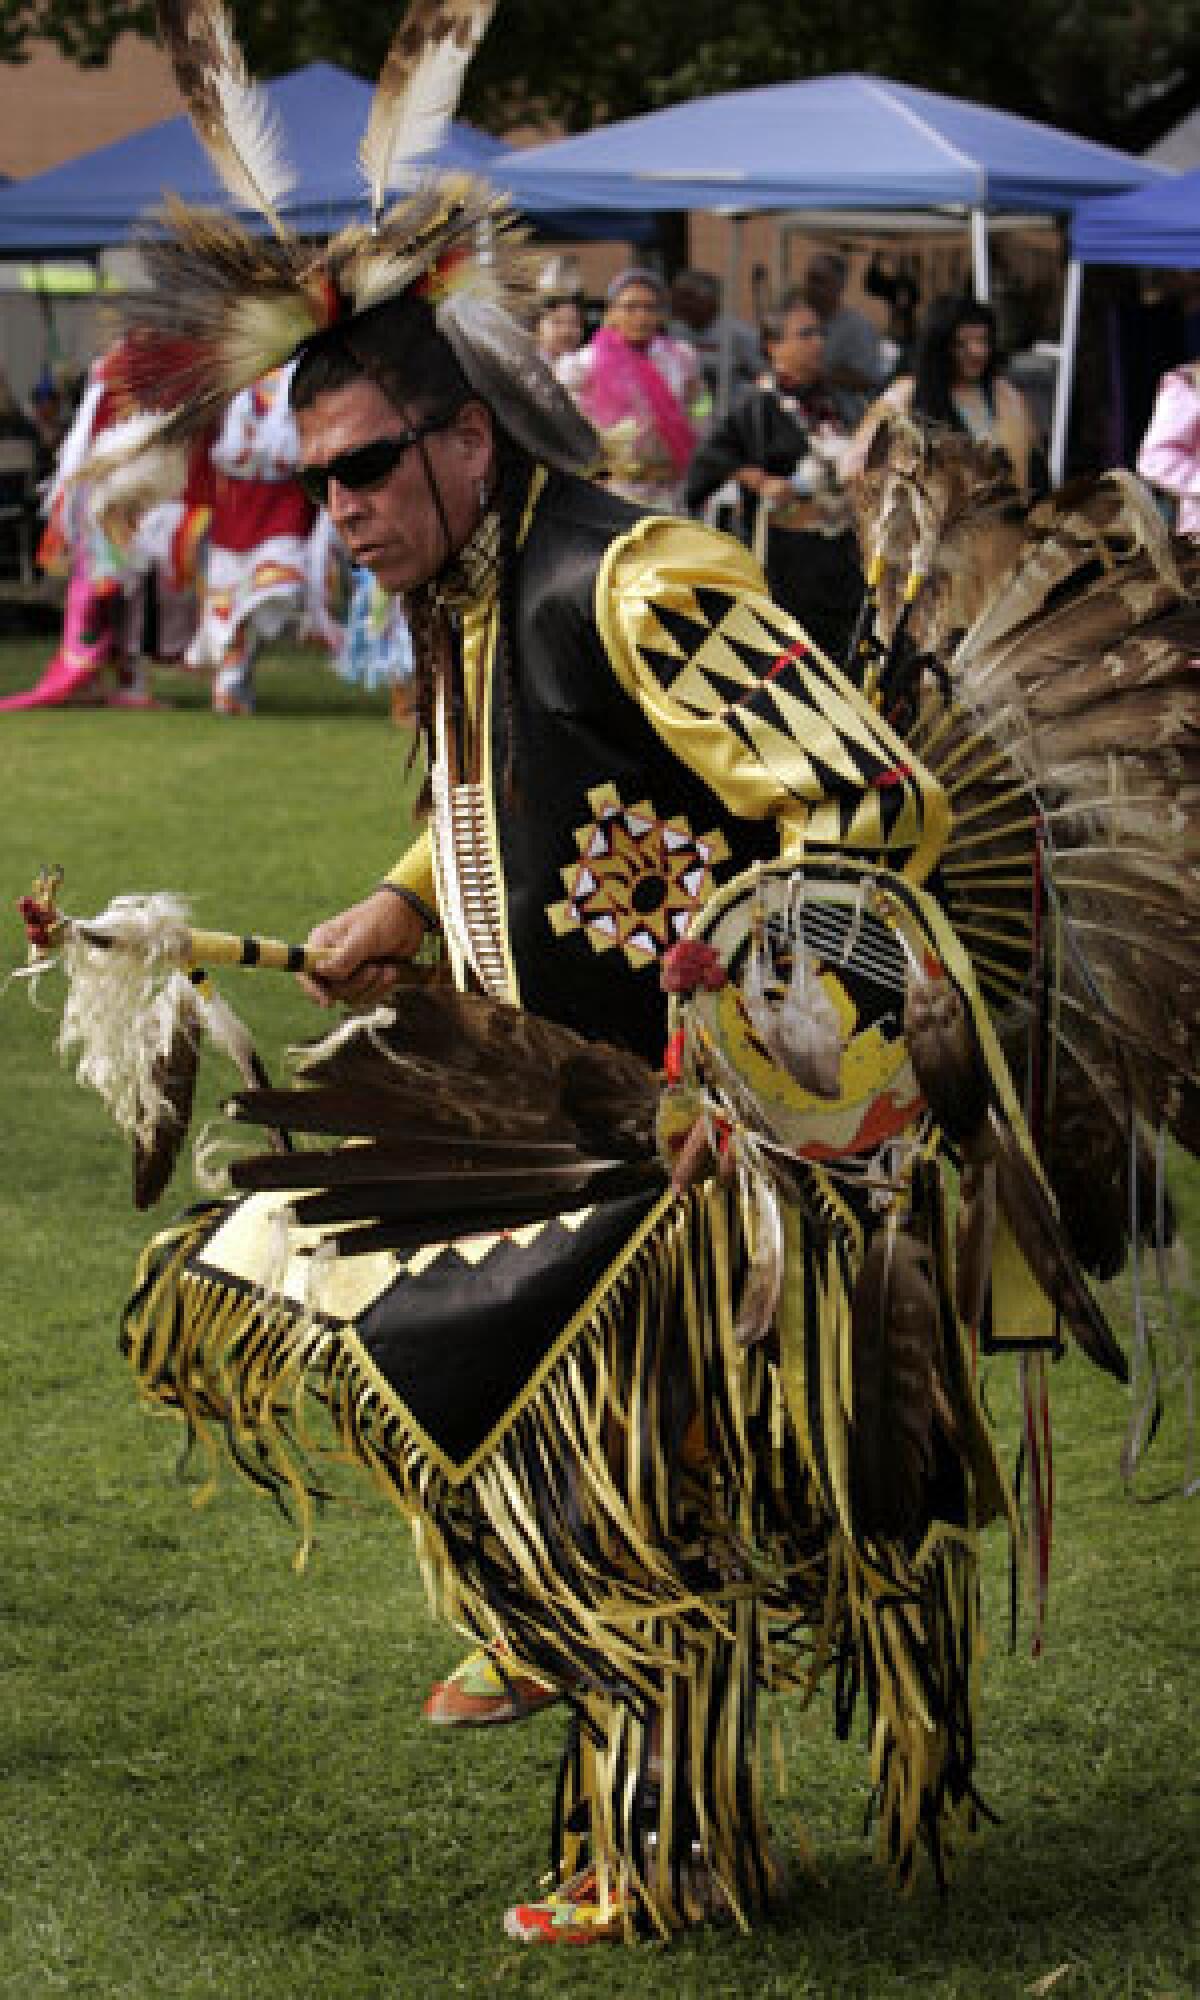 Sam Bearpaw performs a grand entry dance in a traditional Northern Plains warrior's outfit at a powwow held at Cal State Northridge in November 2007.